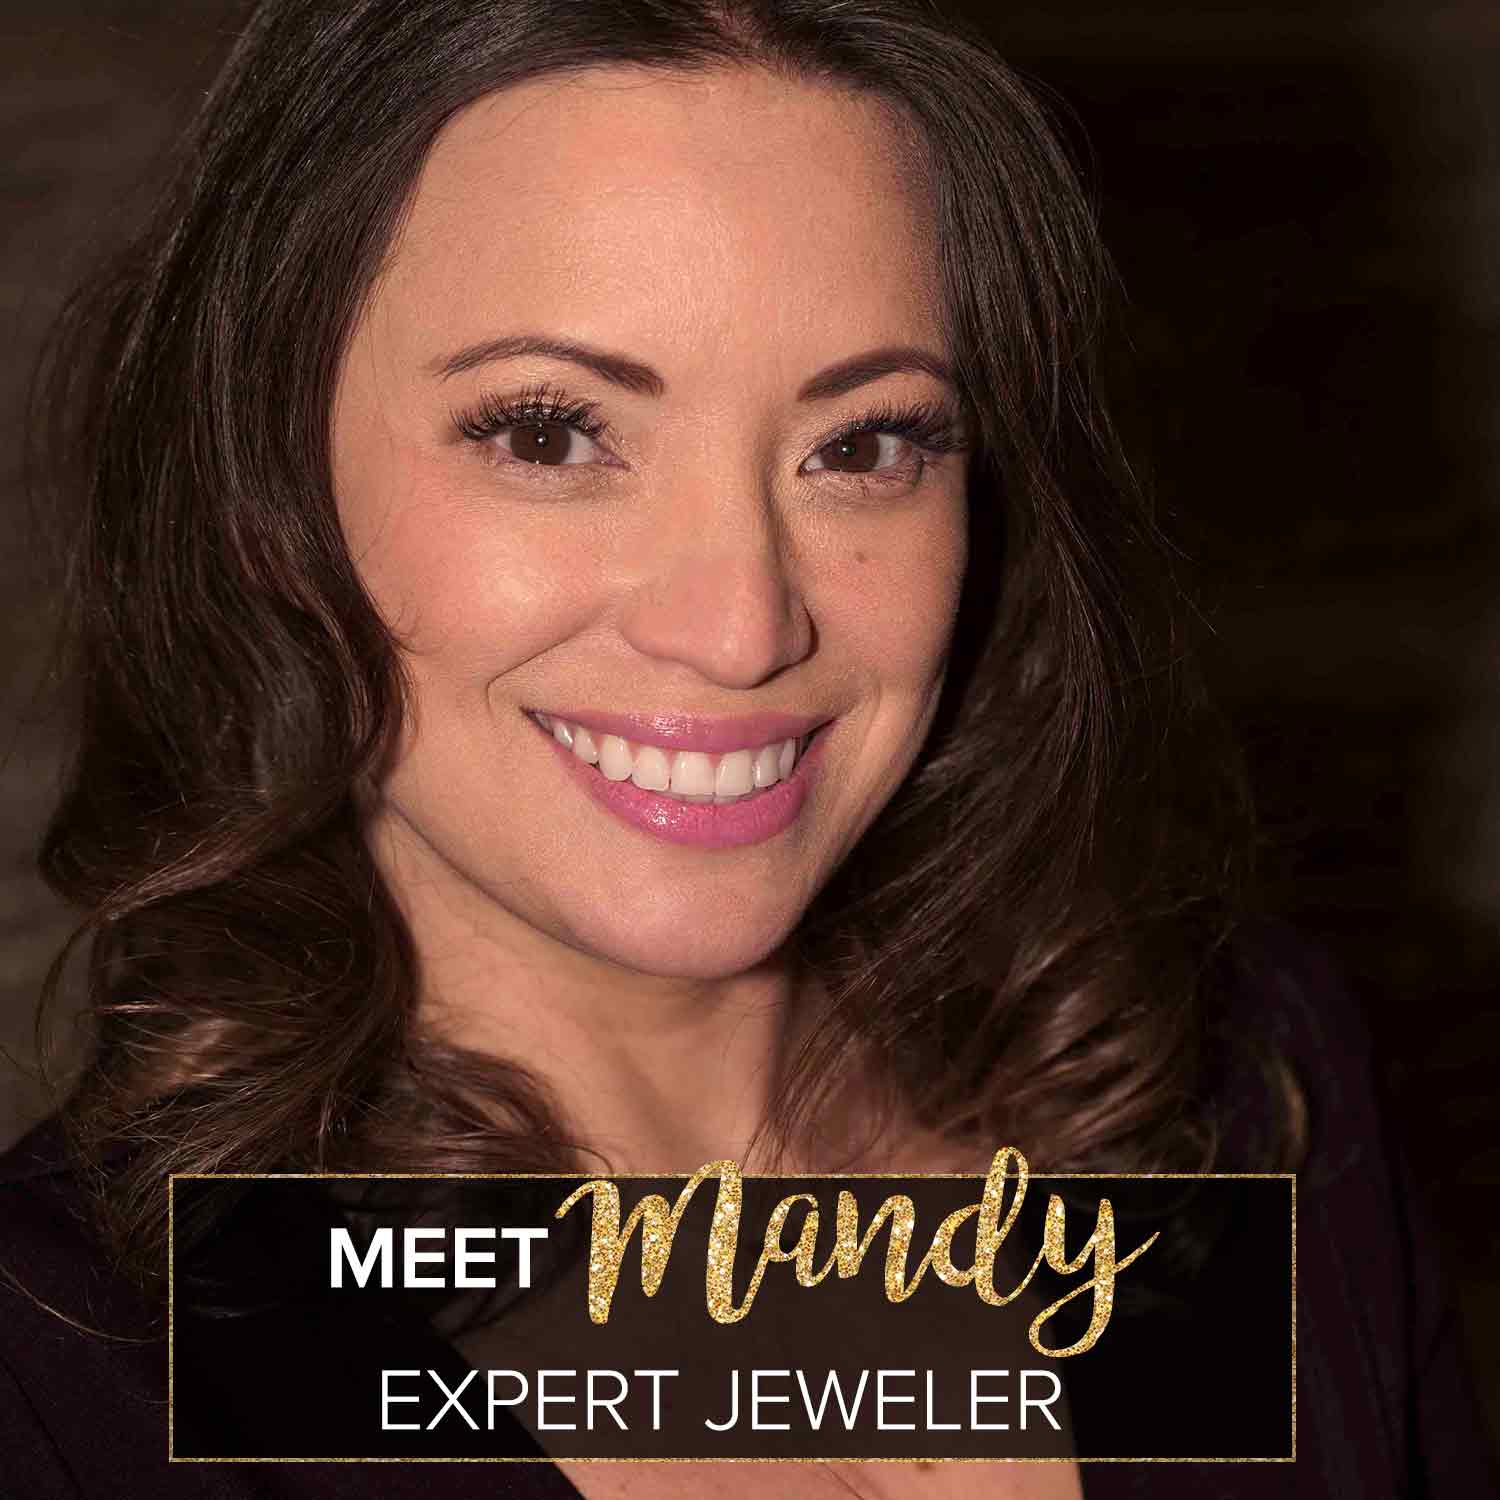 A picture of one of our expert jewelers, Mandy.